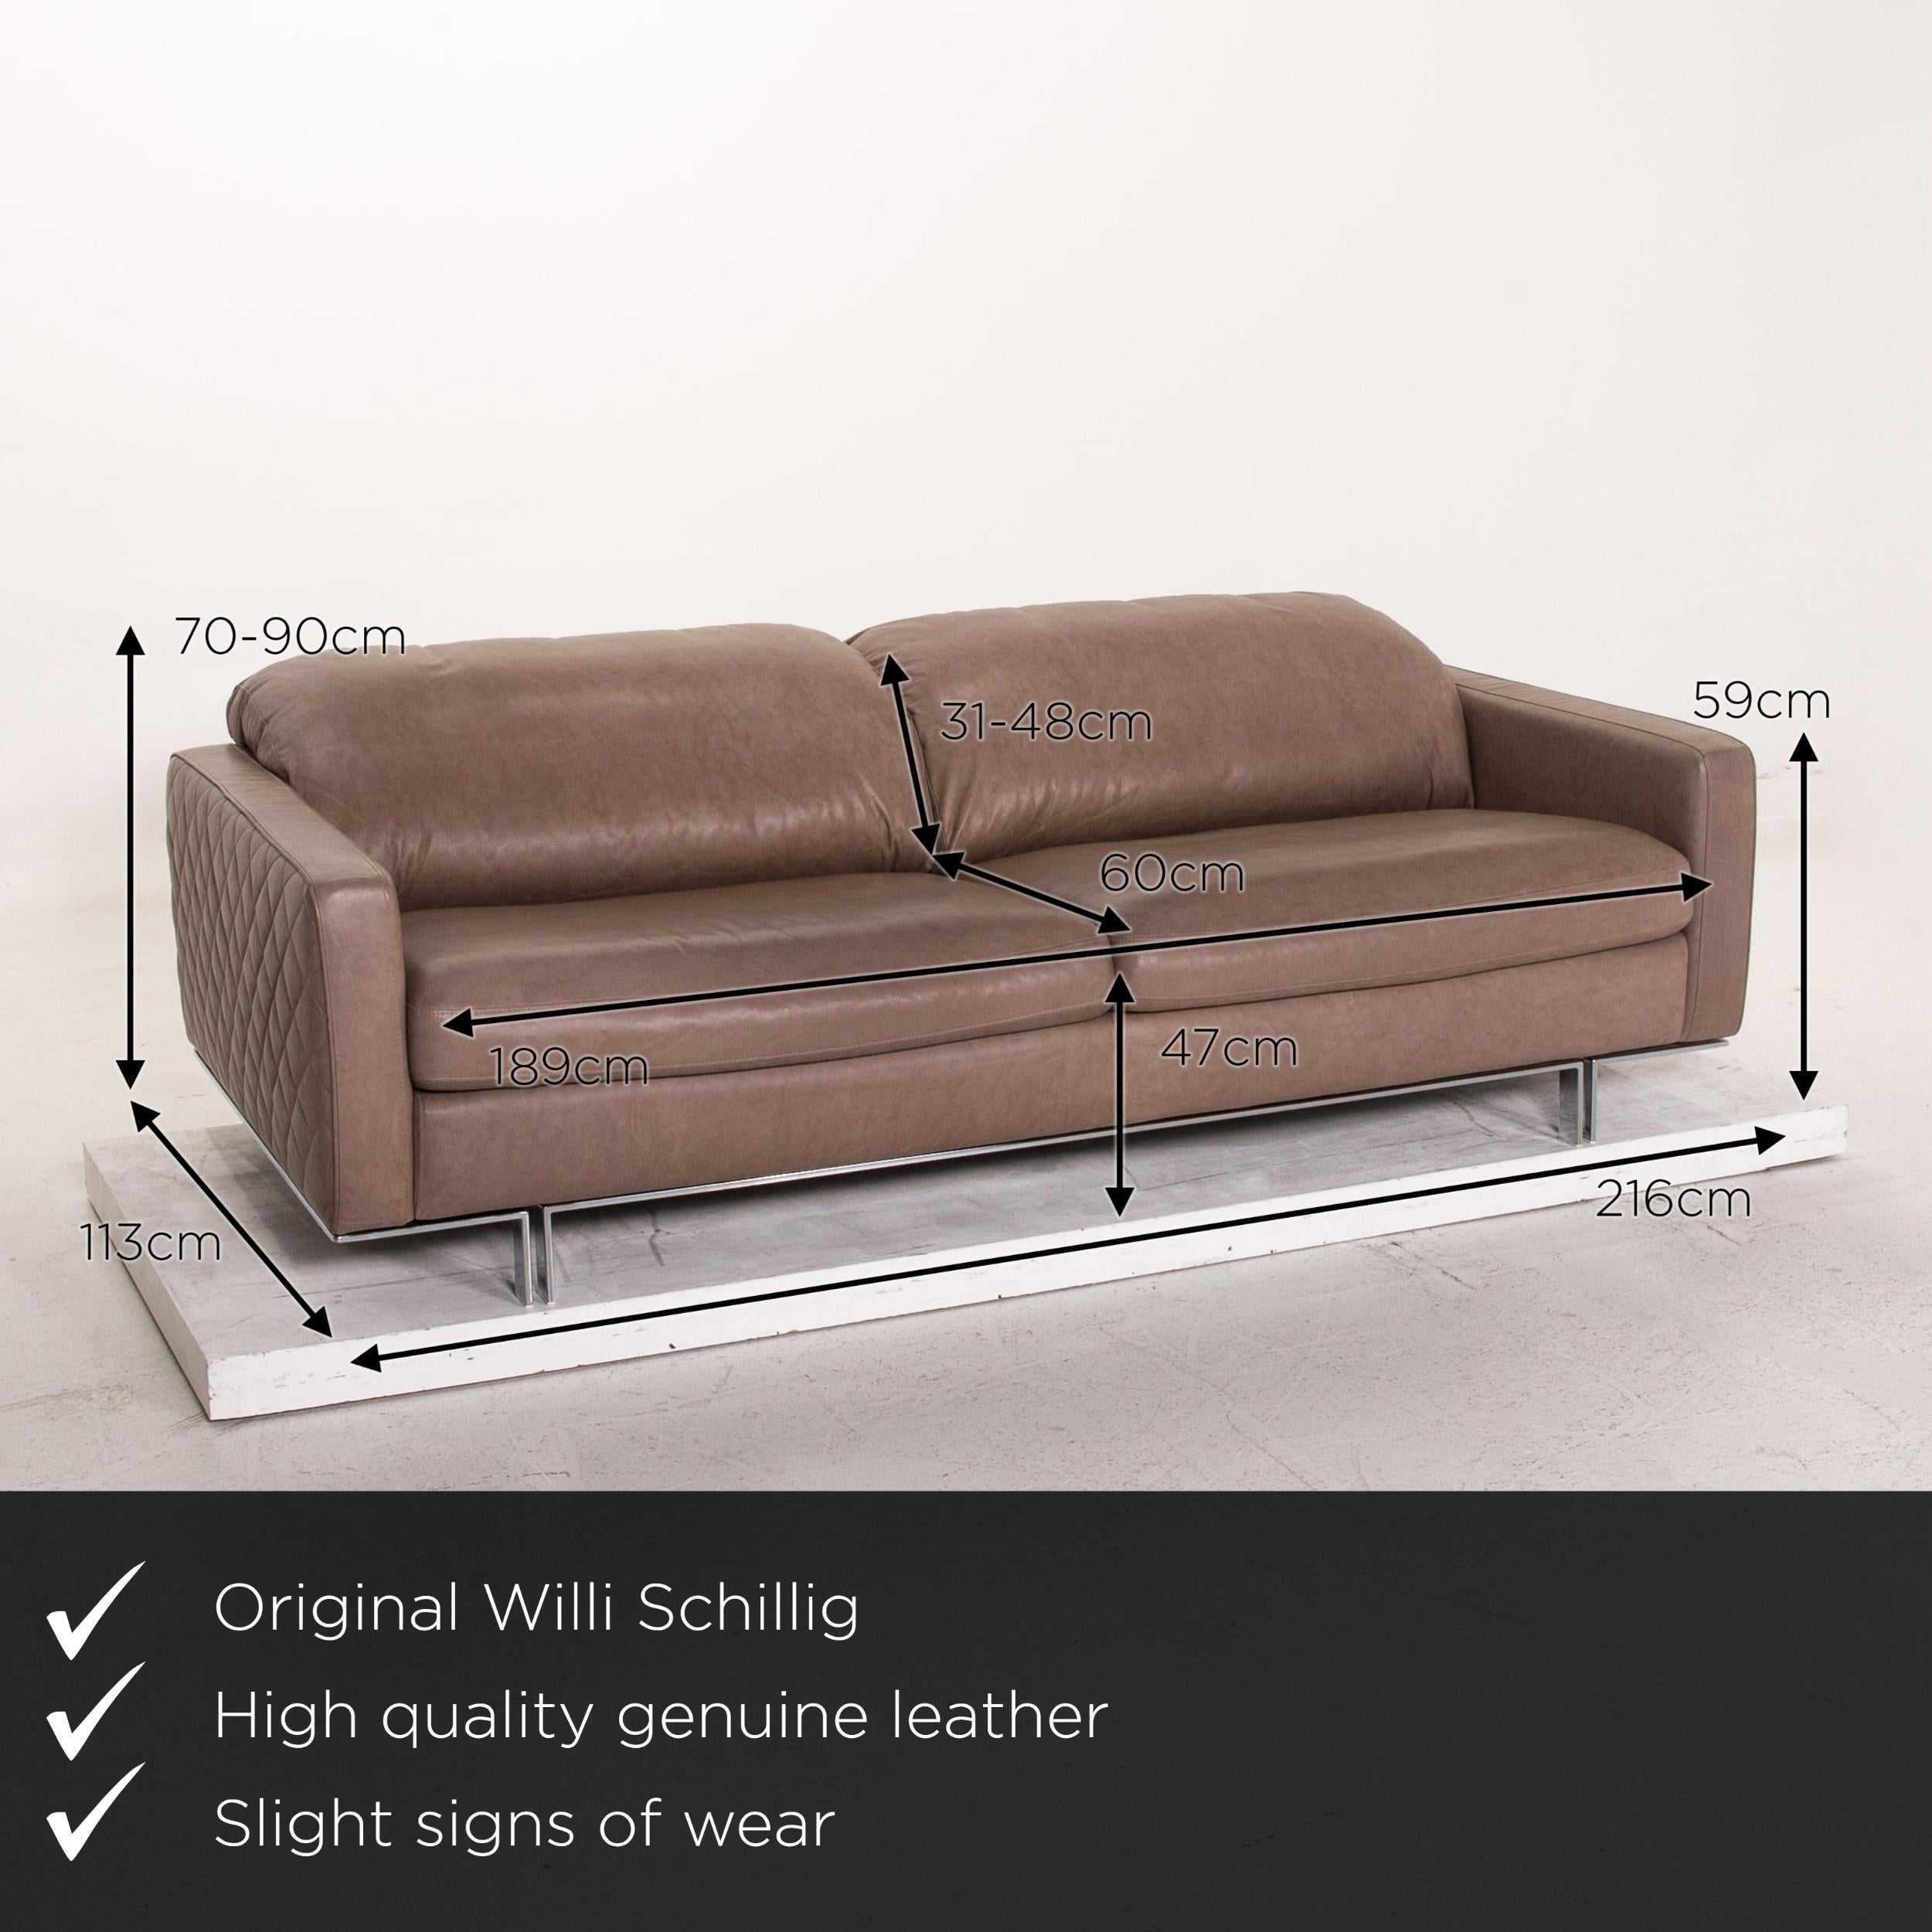 We present to you a Willi Schillig leather sofa gray beige three-seat couch.

Product measurements in centimeters:

Depth 113
Width 216
Height 70
Seat height 47
Rest height 59
Seat depth 60
Seat width 189
Back height 31.
 
 
  